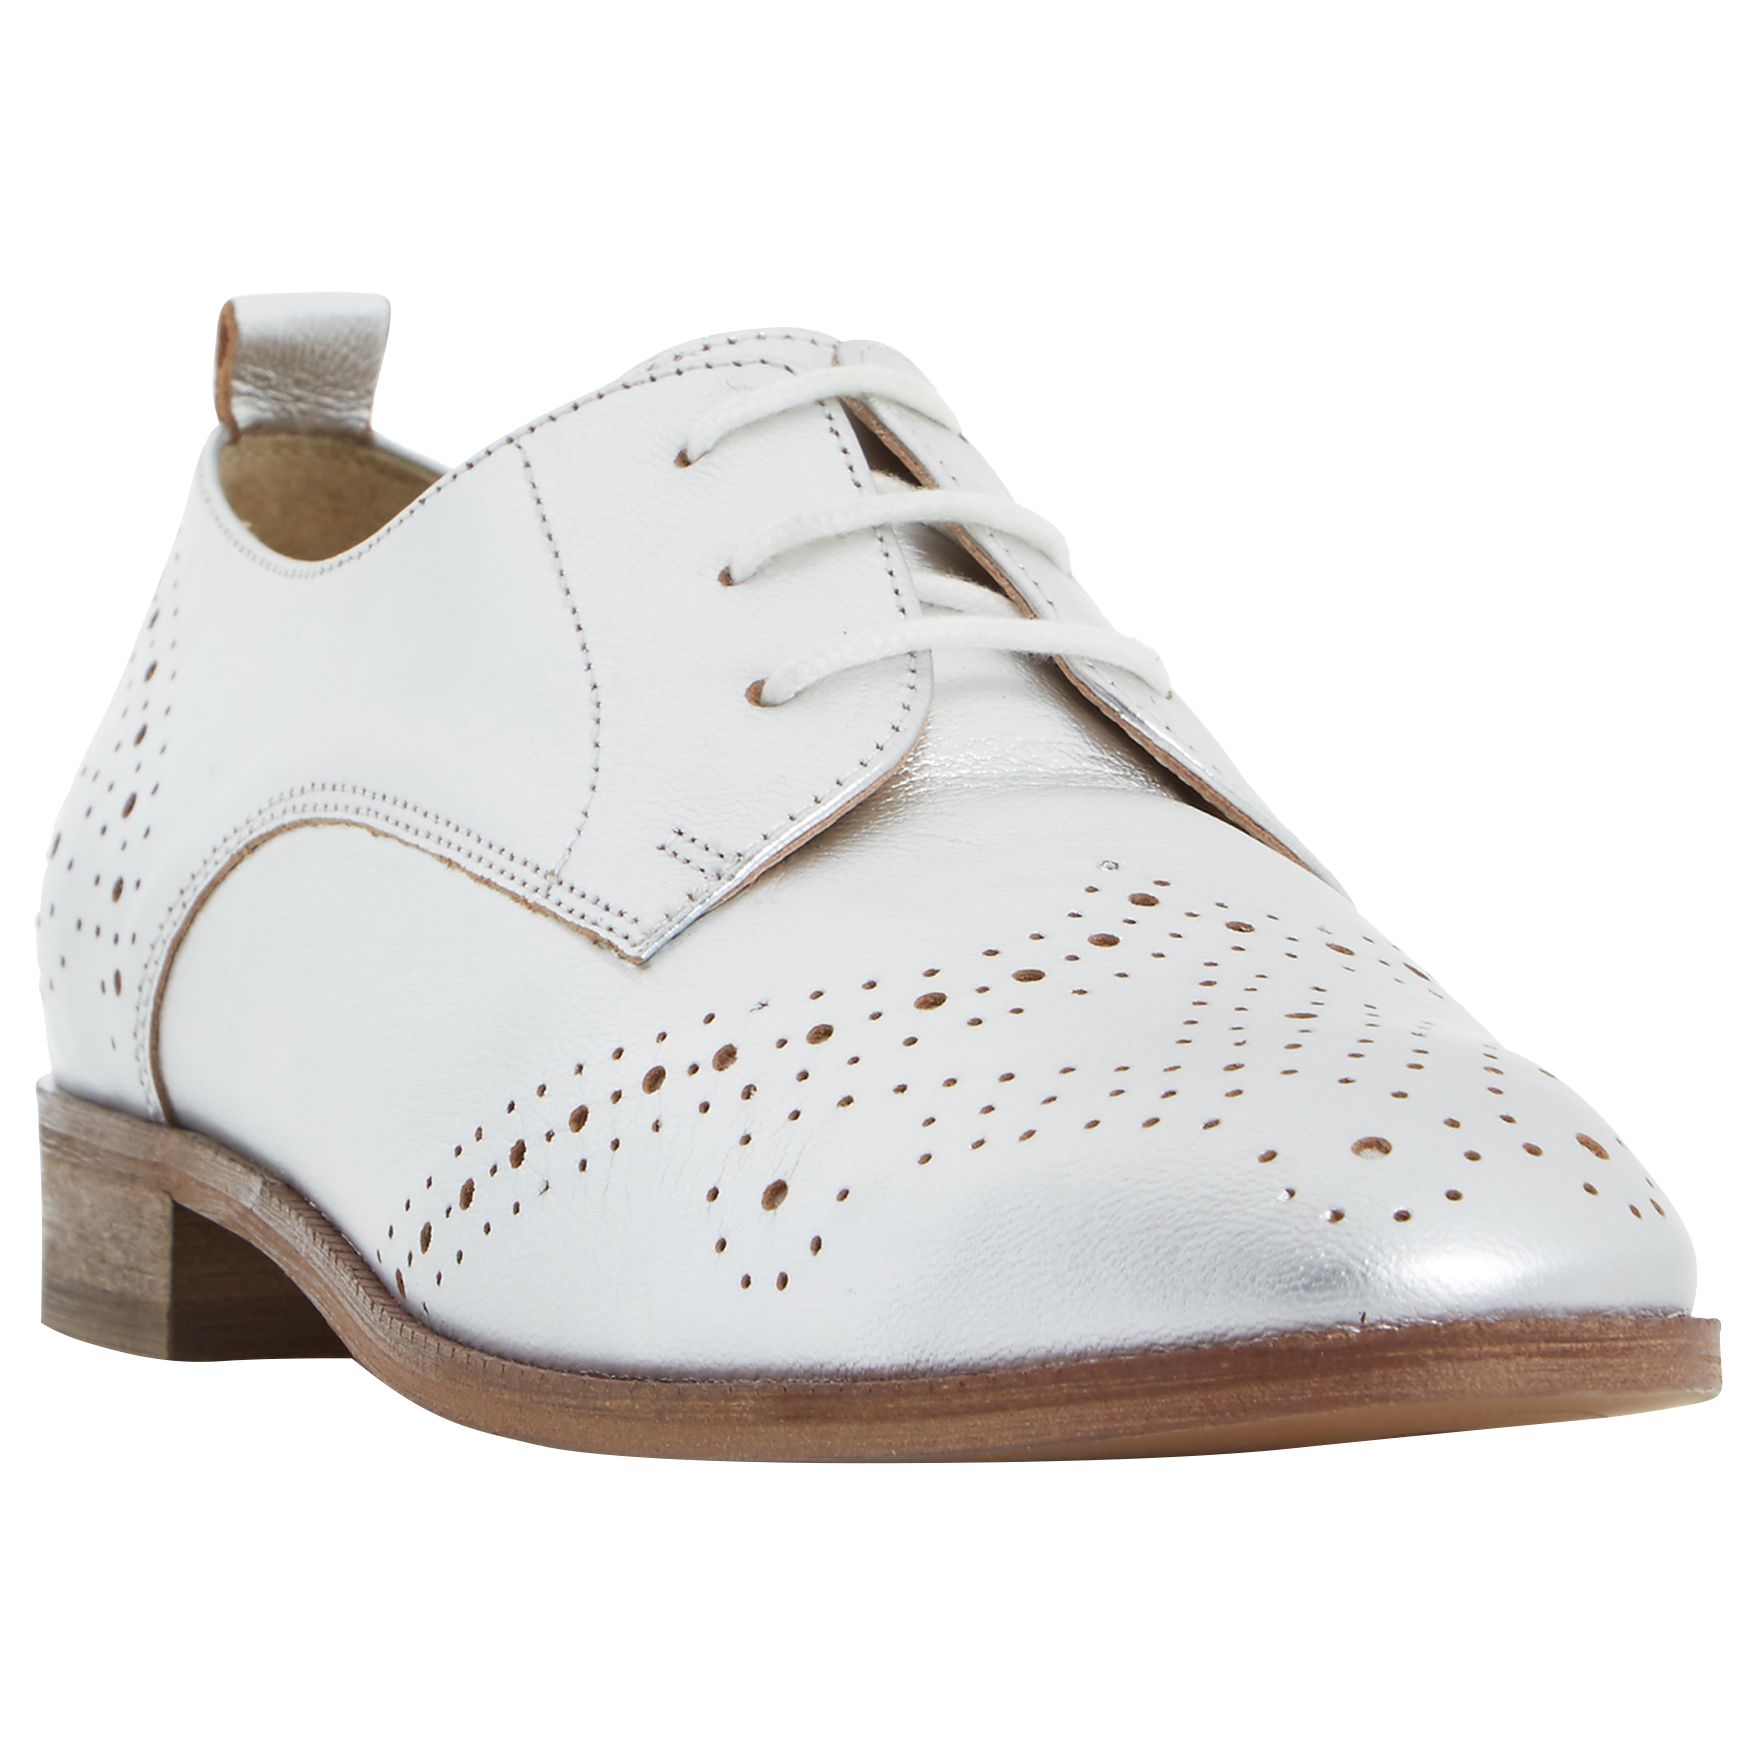 Dune Foster Lace Up Leather Brogues, Silver, 7